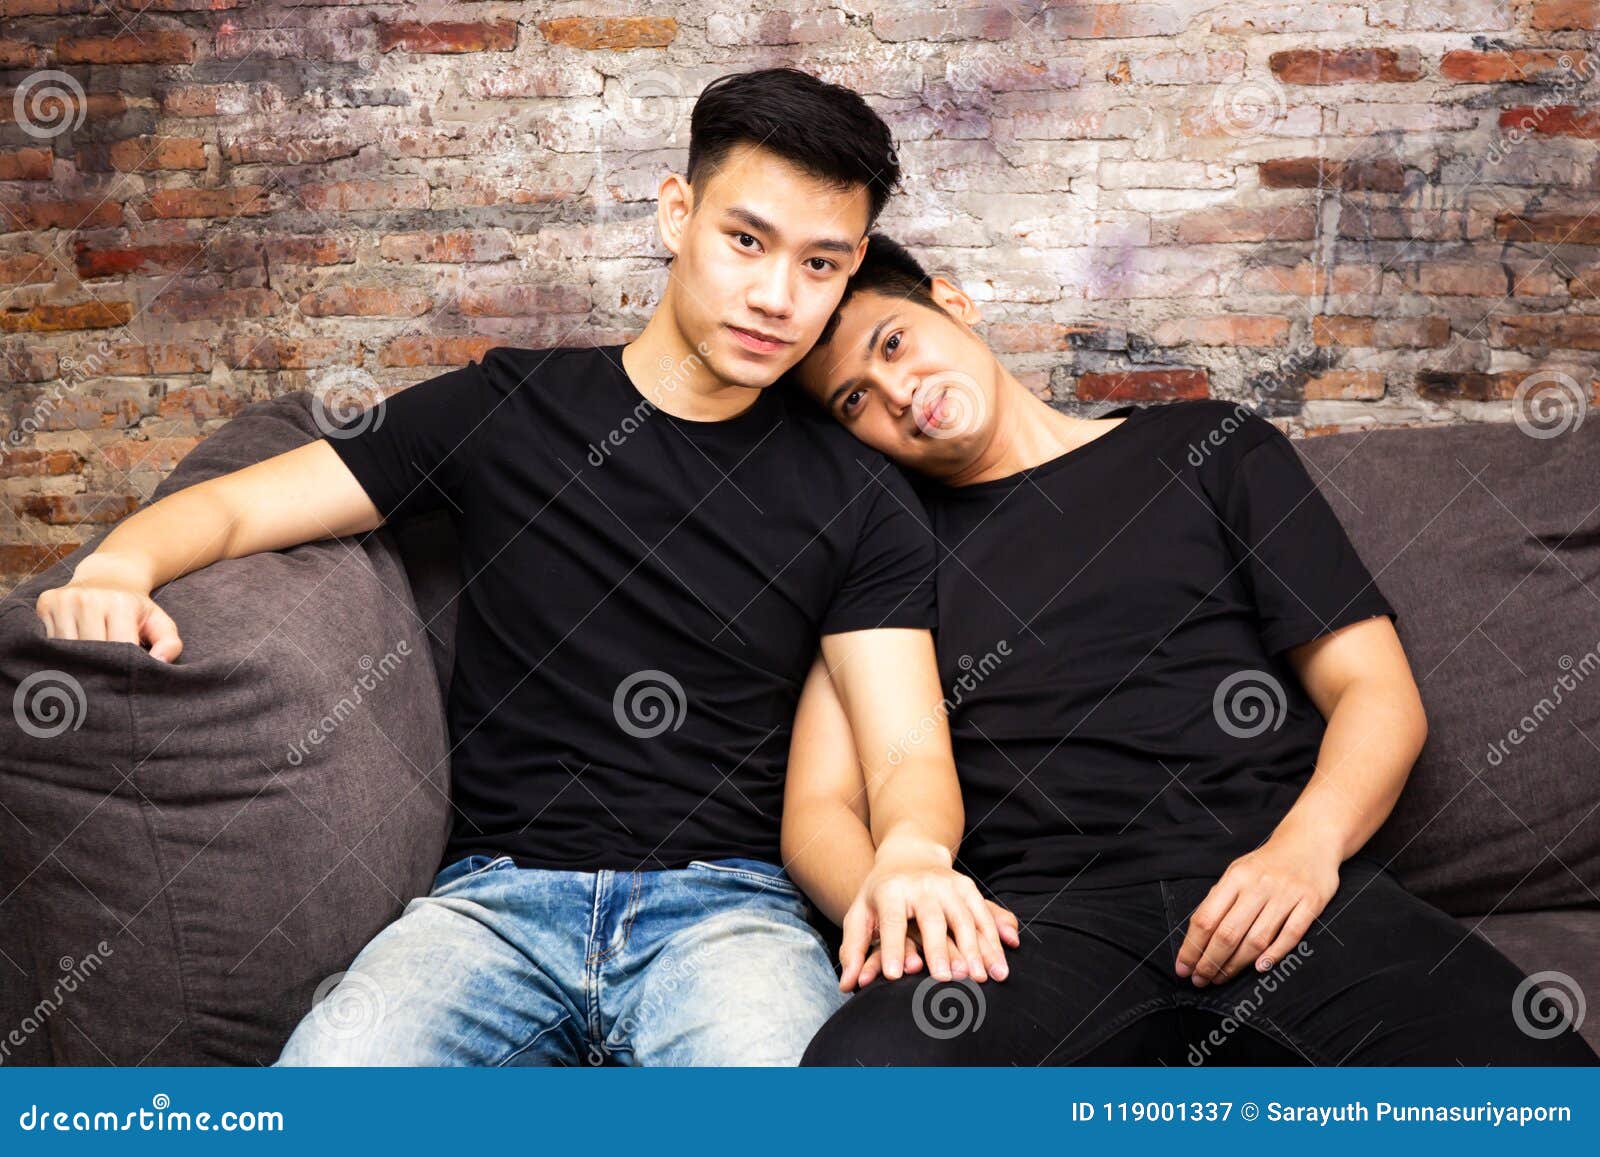 Asian Gay Couple Spending Time At Home Together And Looking At Camera Portrait Of Happy Gay Men